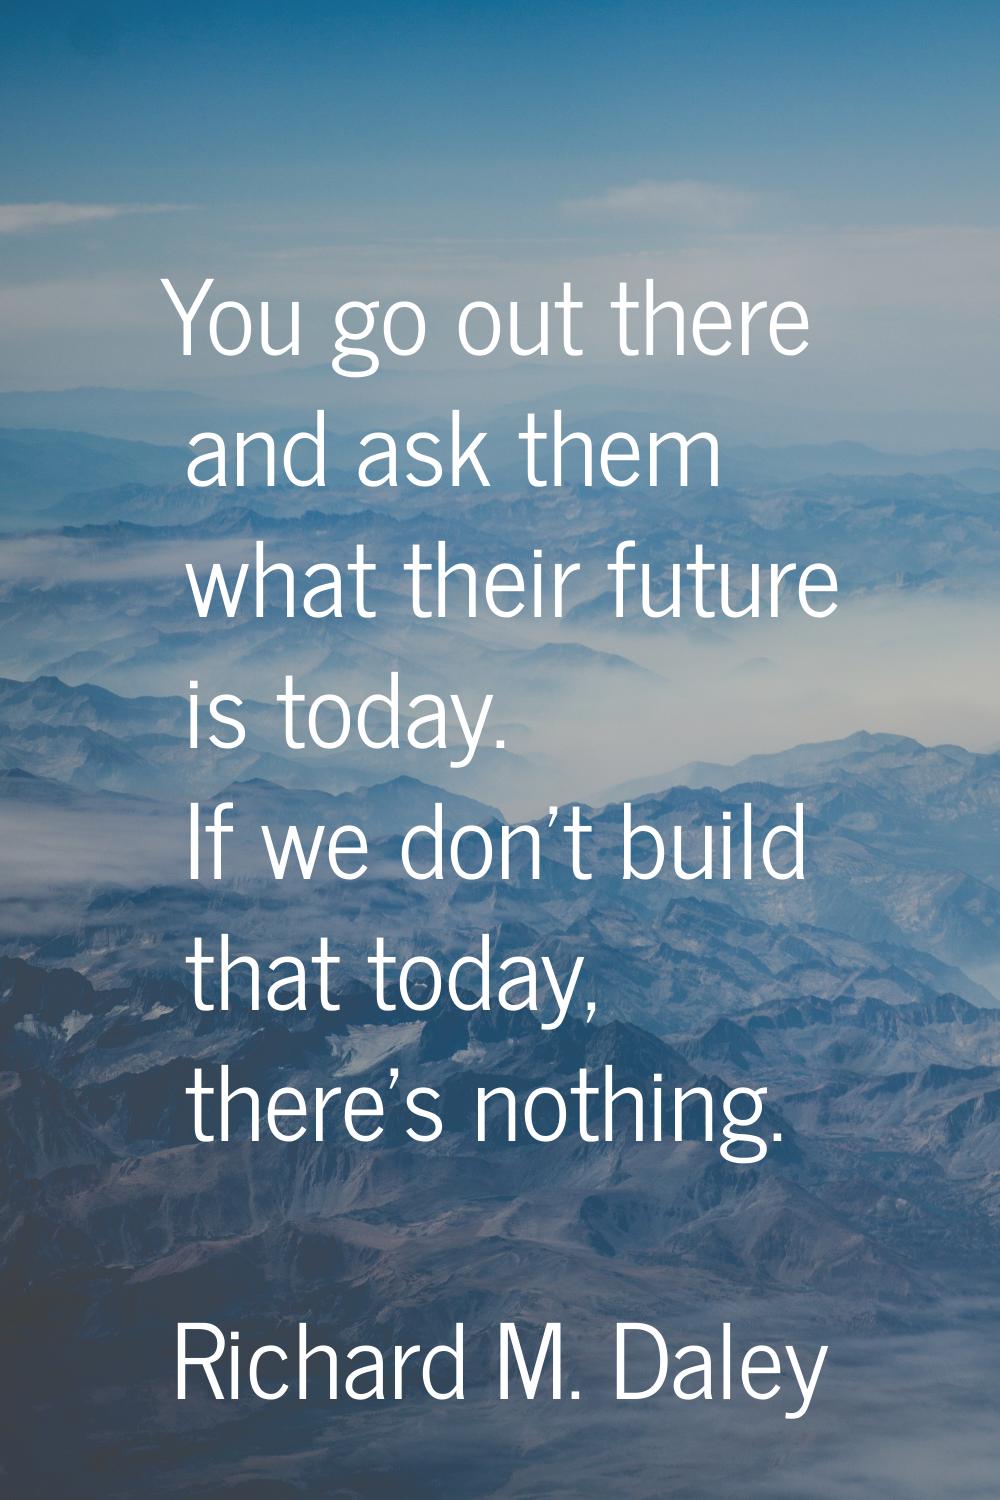 You go out there and ask them what their future is today. If we don't build that today, there's not